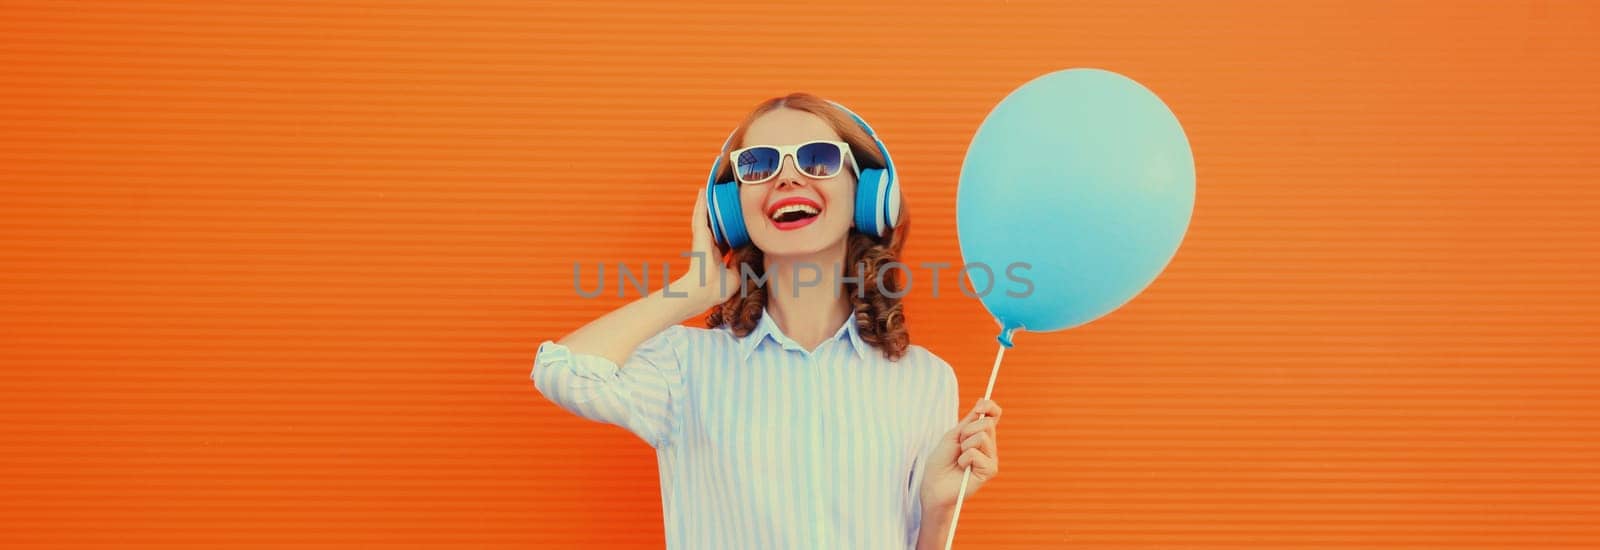 Portrait of happy cheerful young woman in wireless headphones listening to music with blue balloon on orange background